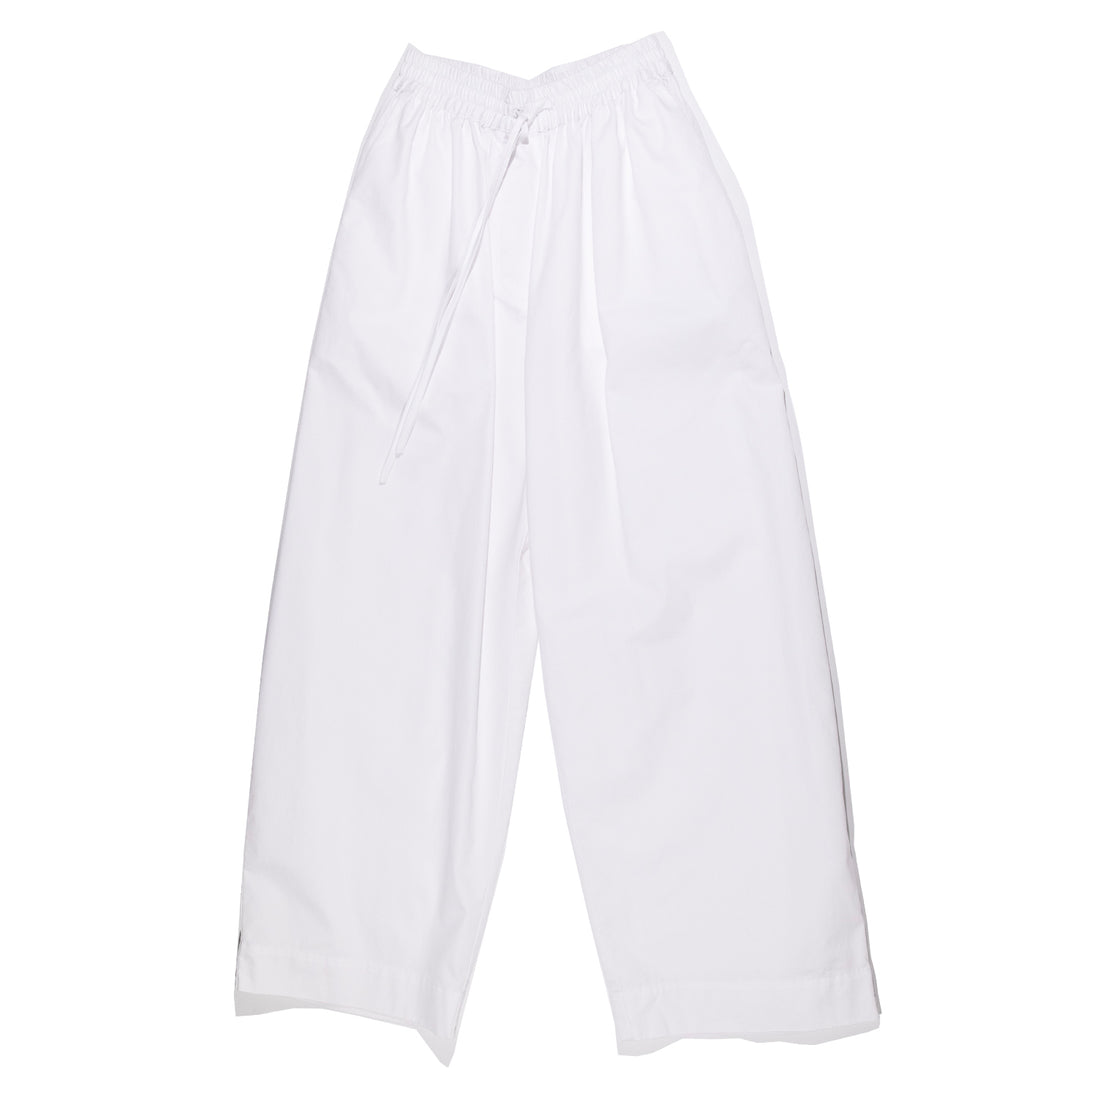 Grei Ovate East Pant in White Fine Twill